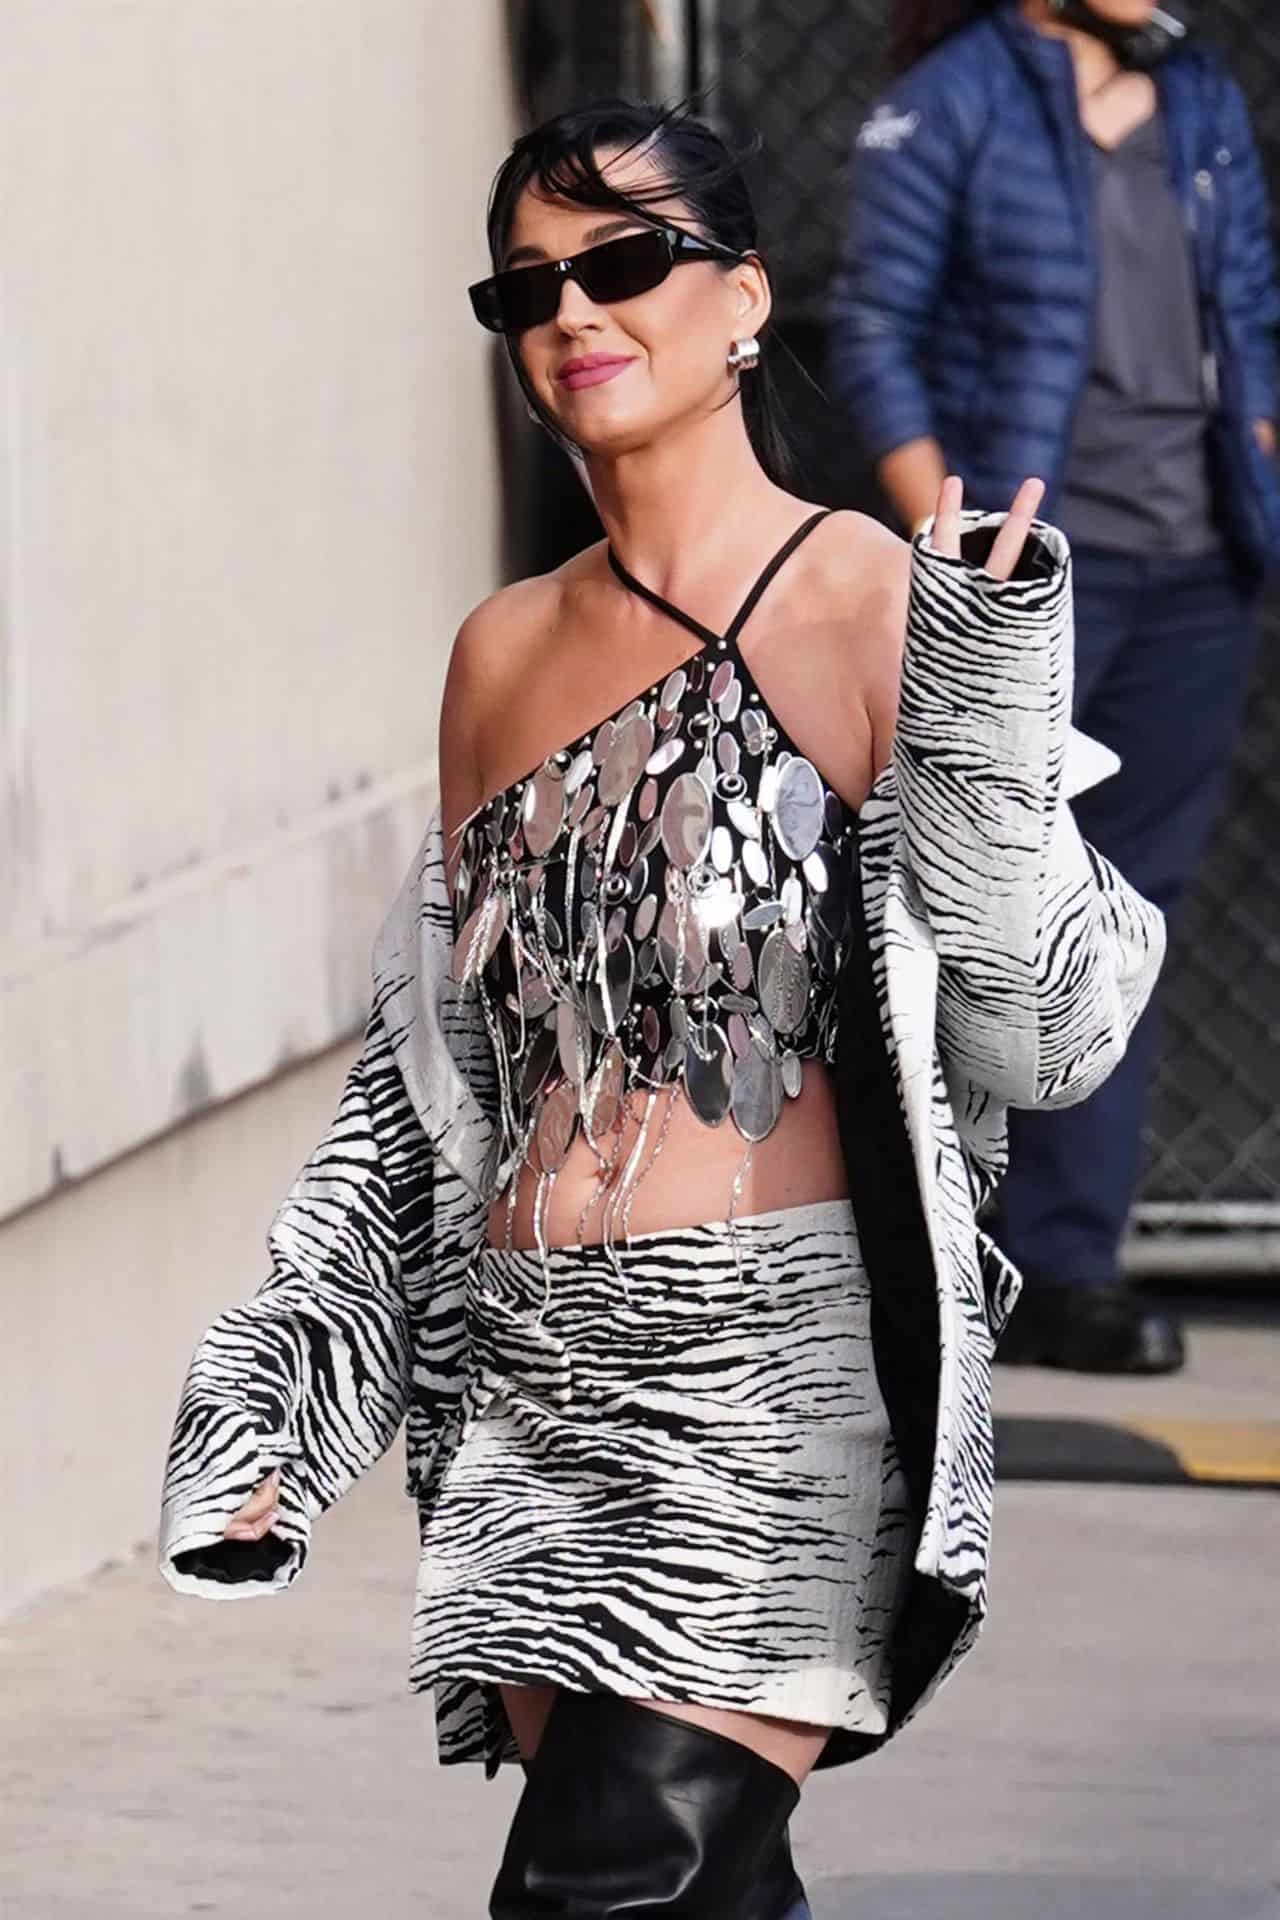 Katy Perry Shines in Sparkling Crop Top at Jimmy Kimmel Live Studio